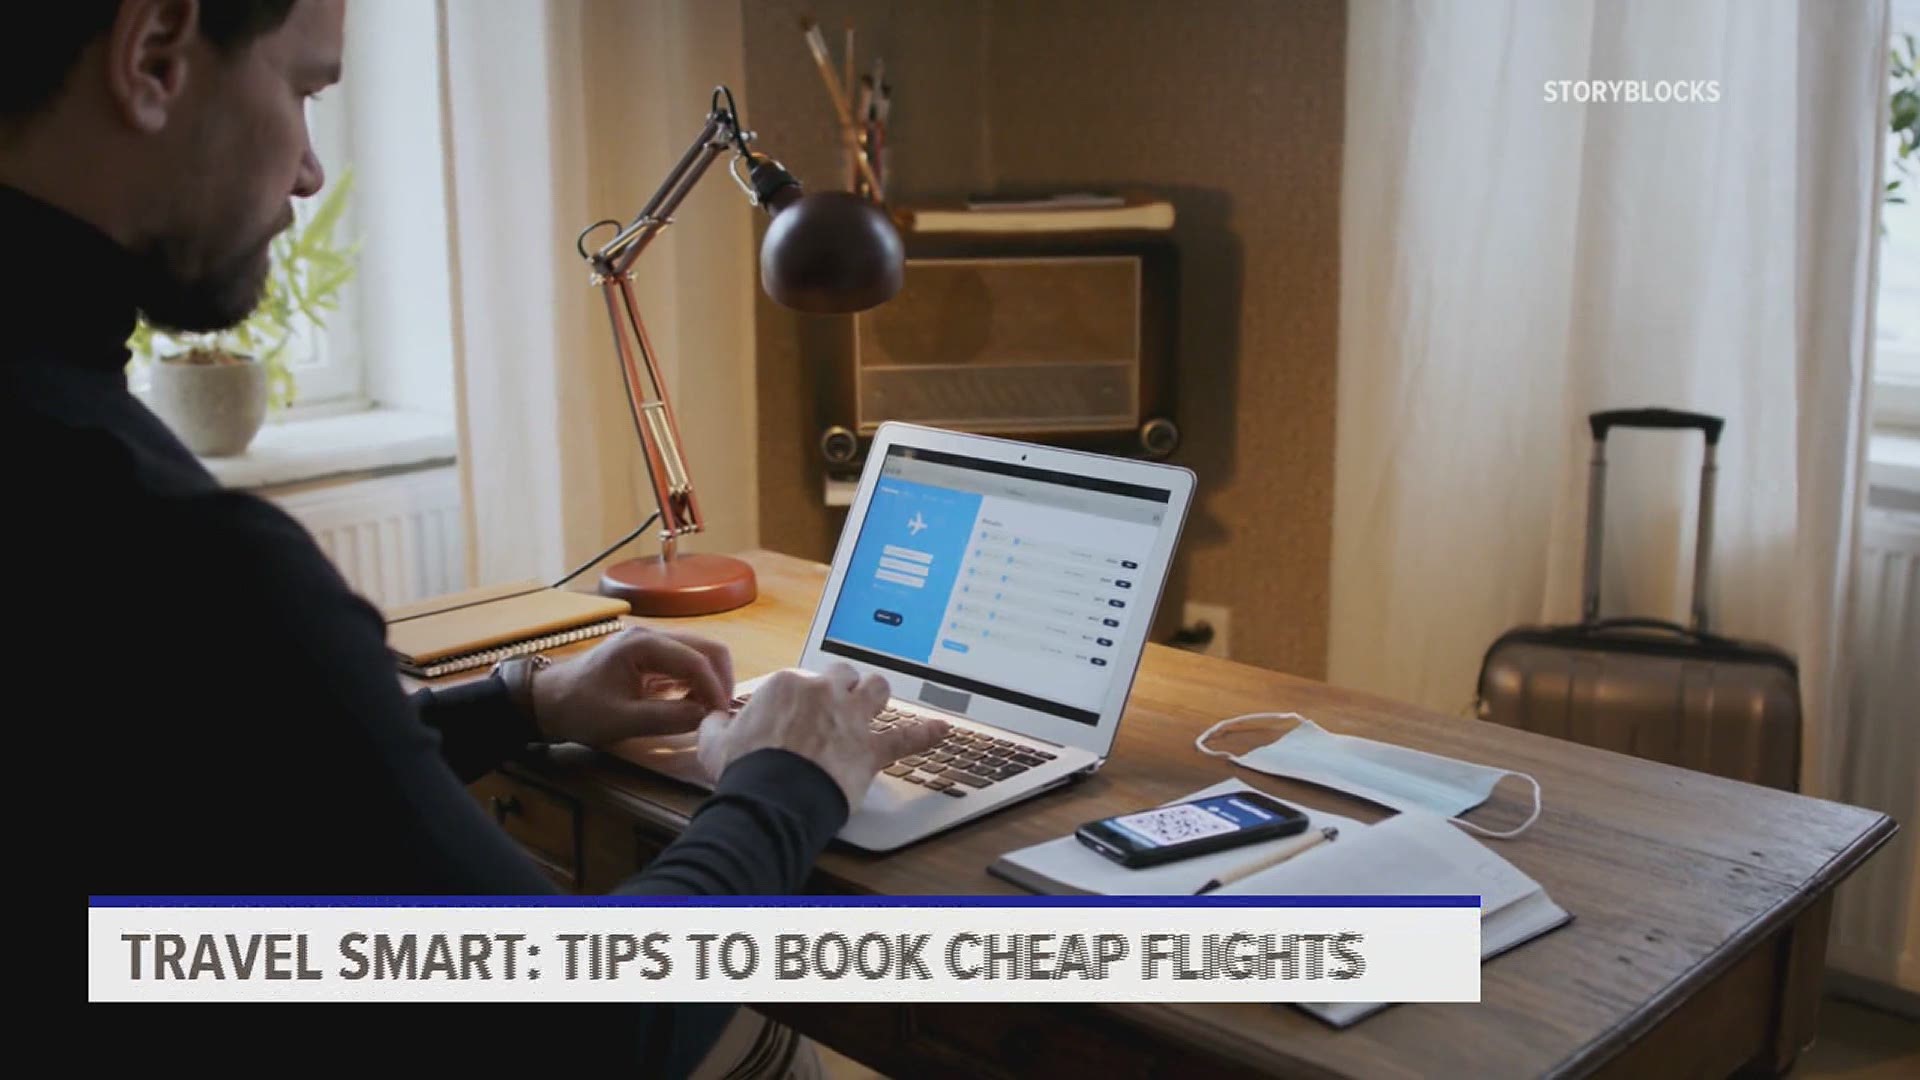 Scott Keyes from Scott's Cheap Flights offered tips on when the best time to book your next flight is.